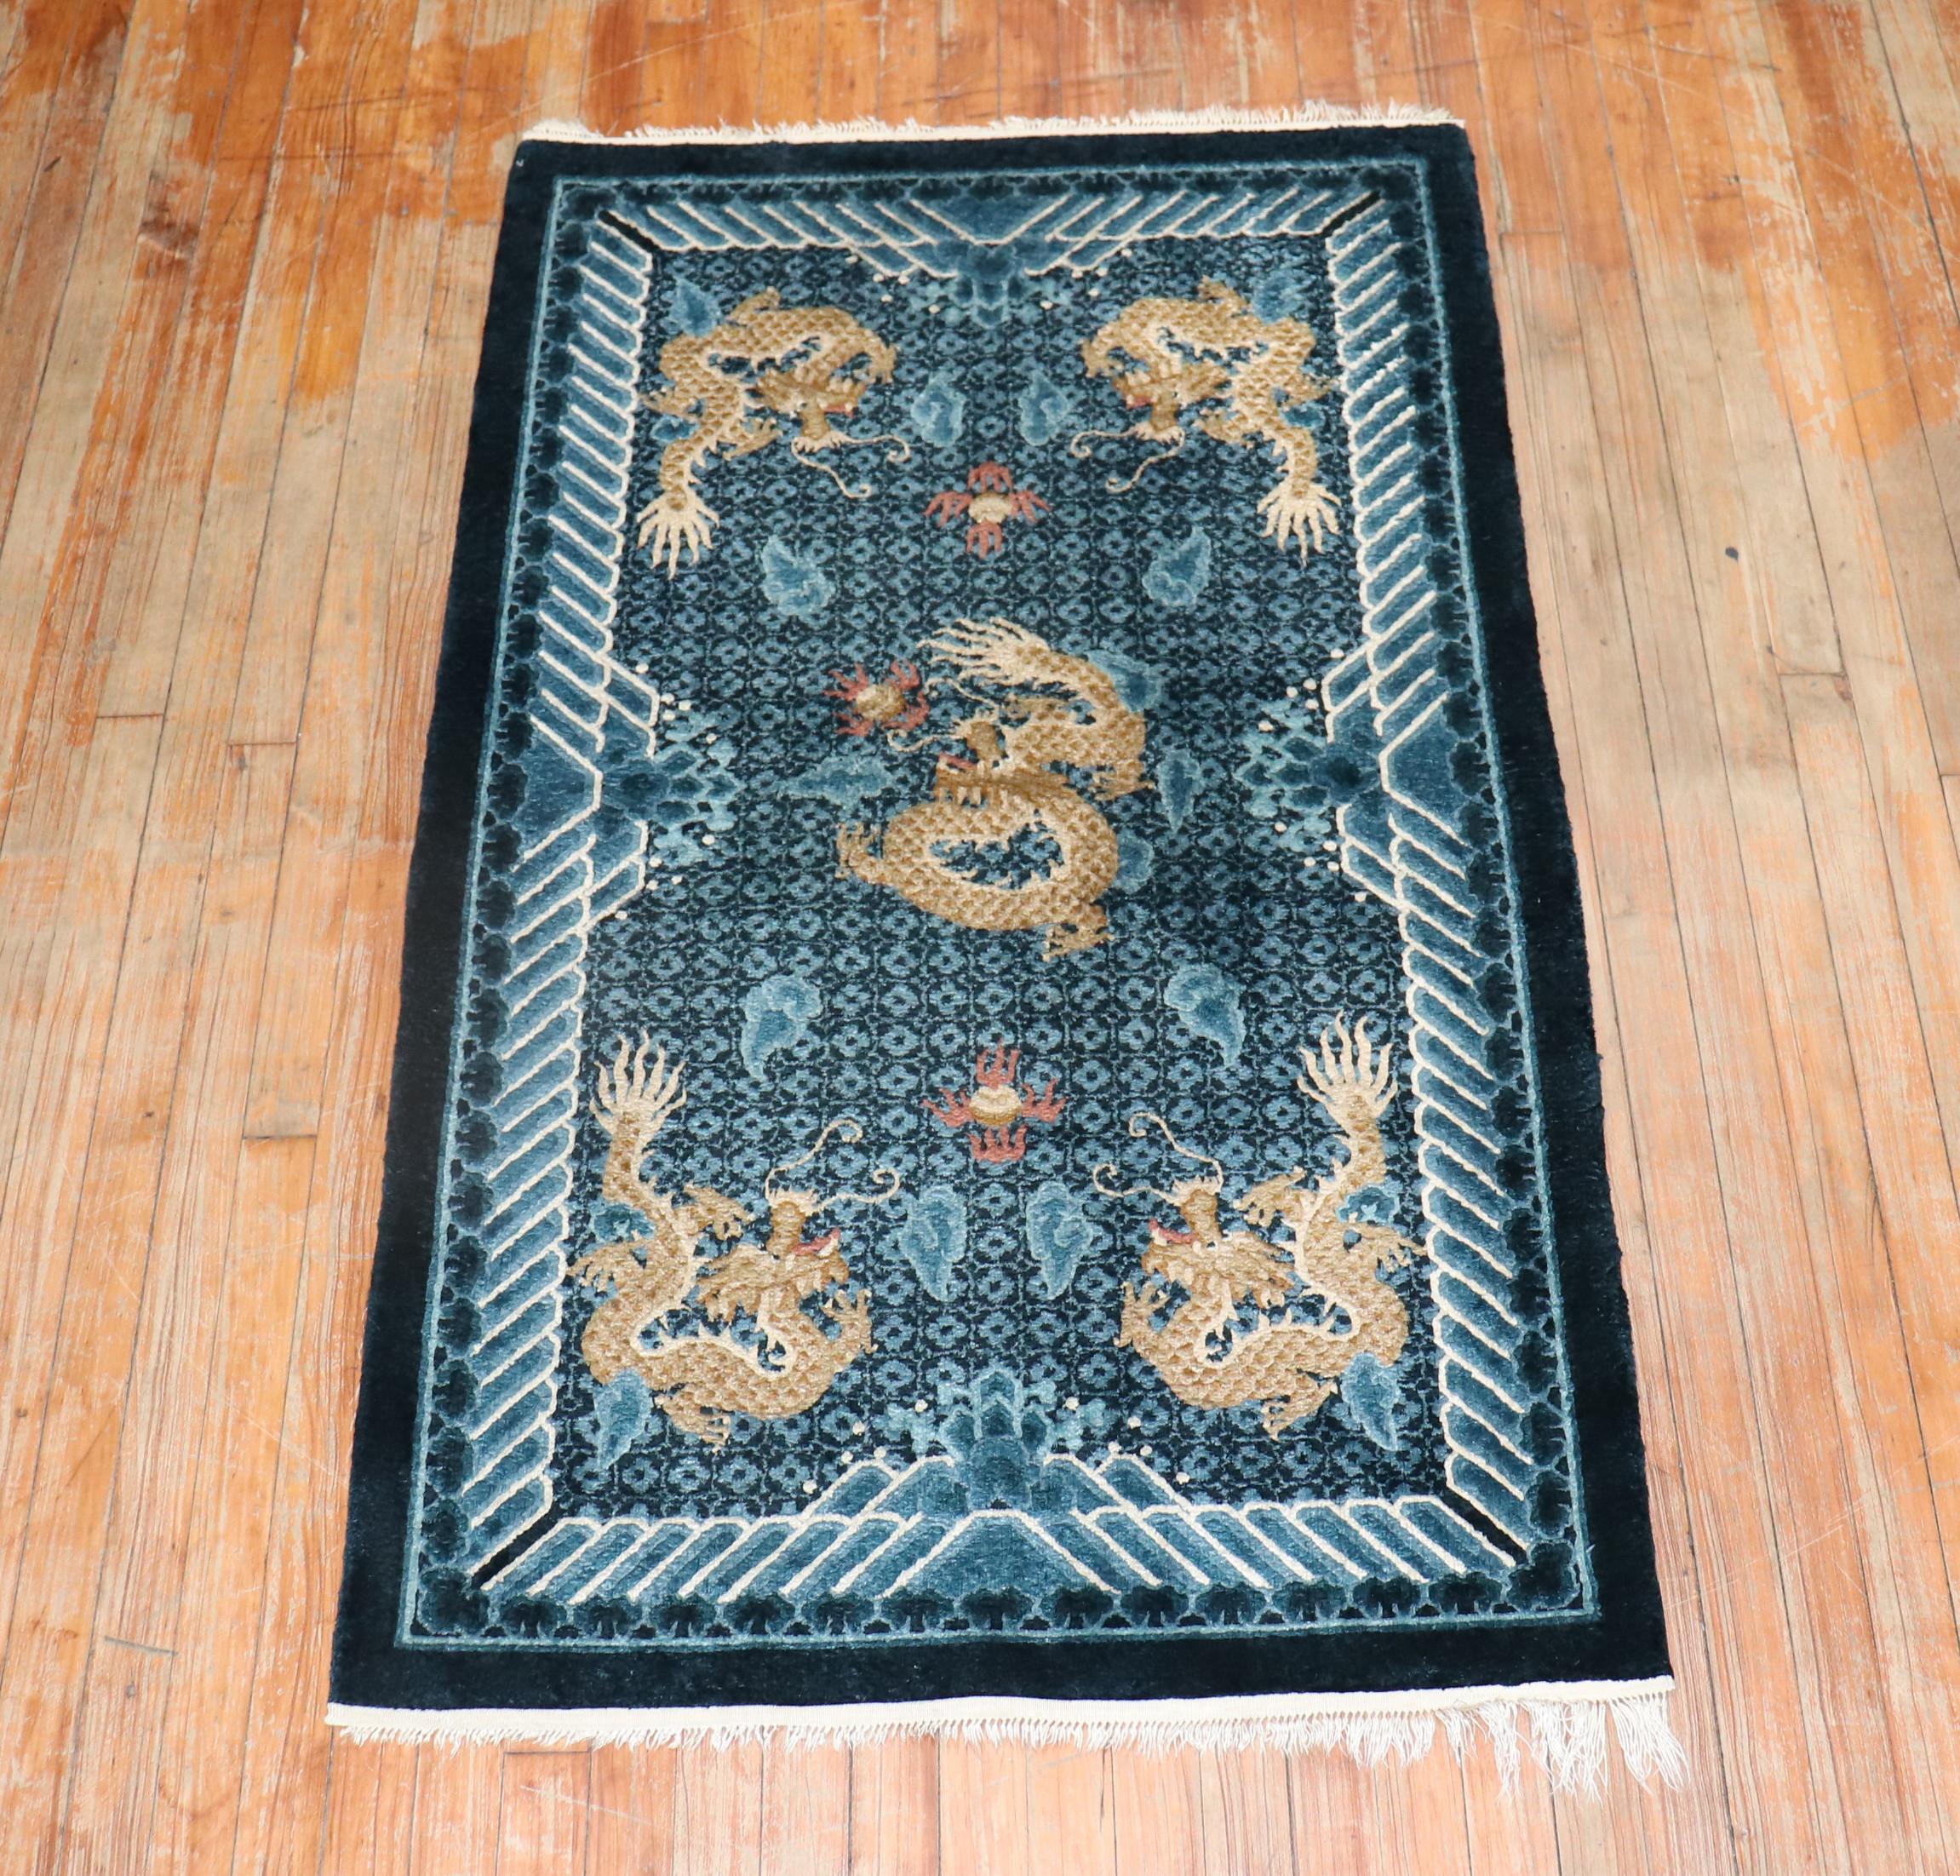 A late 20th-century  one of a kind hand-knotted Chinese Silk rug with a dragon motif 

Measures: 3' x 5'